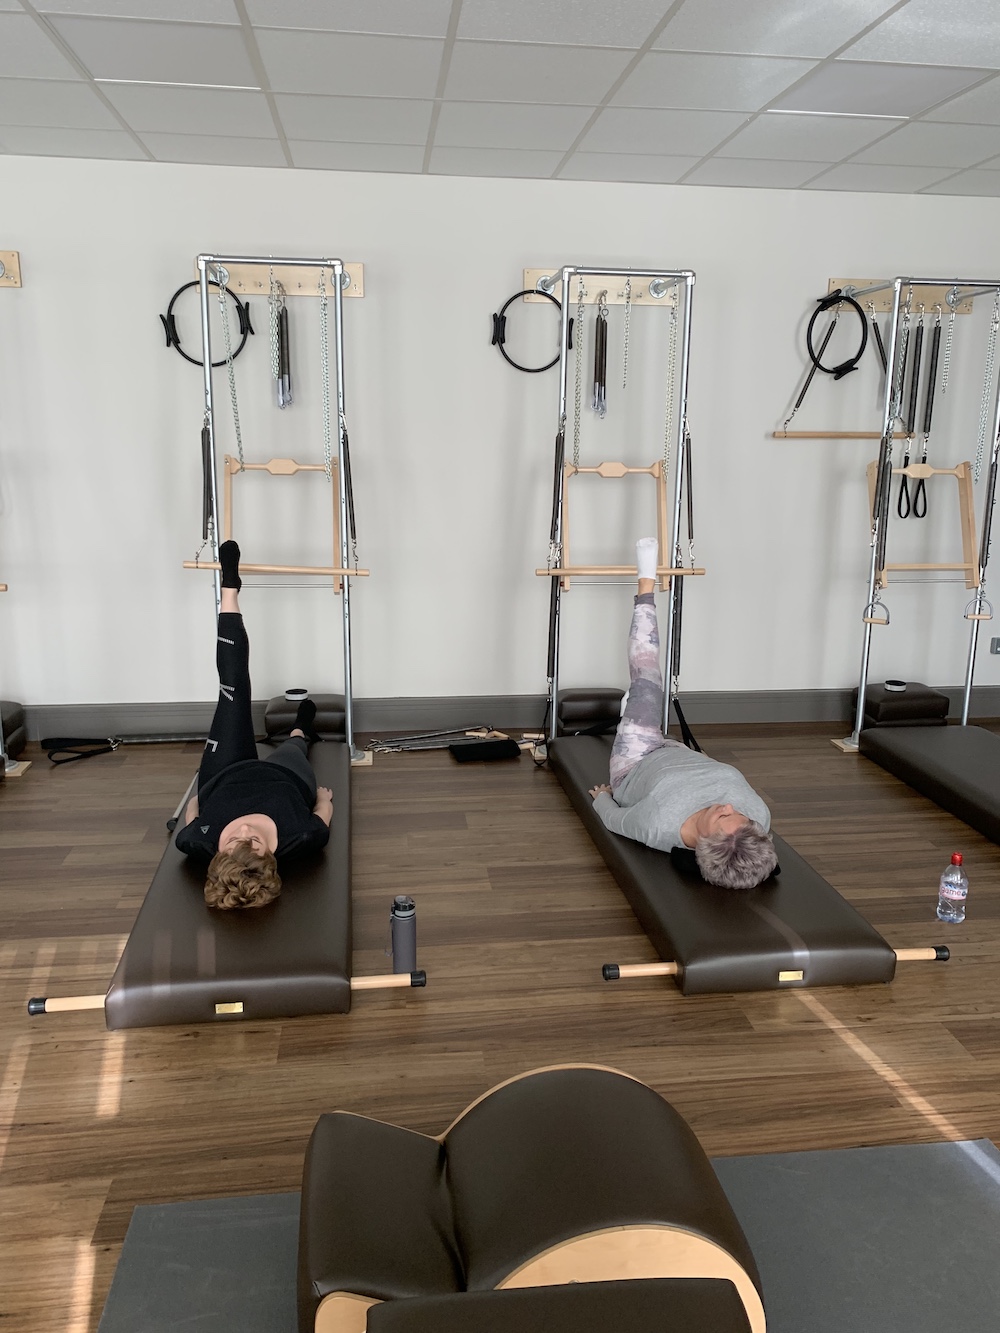 Clients of the classical Pilates instructor Sarah Janes